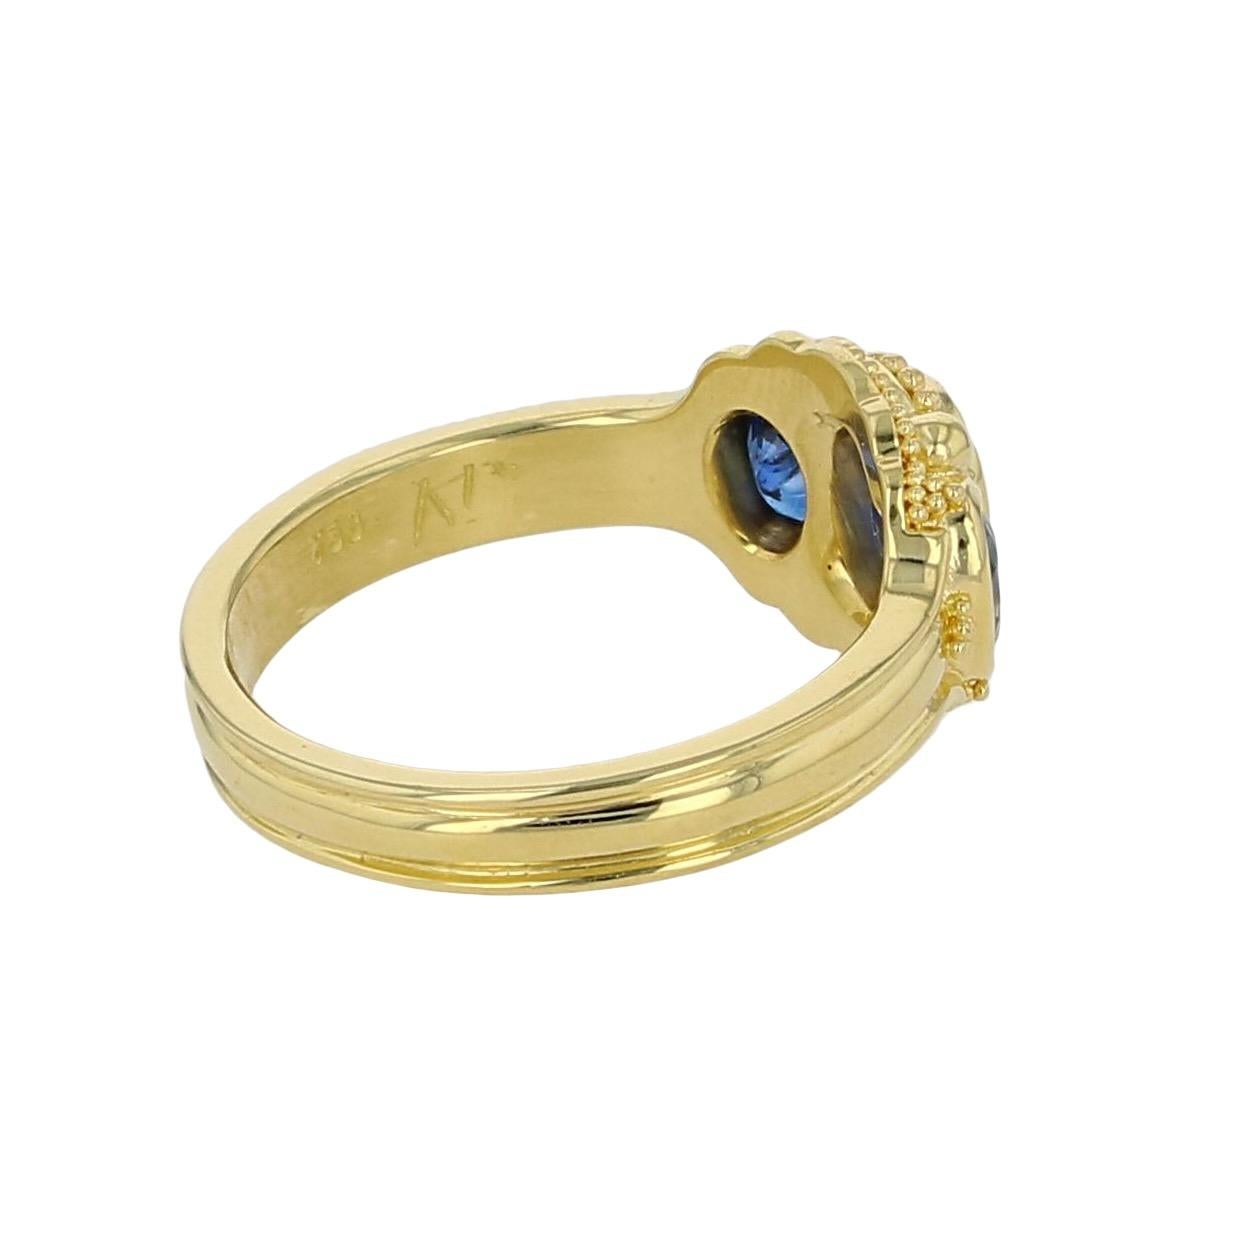 Women's or Men's Kent Raible 18 karat Gold three stone Blue Sapphire Ring with Fine Granulation For Sale